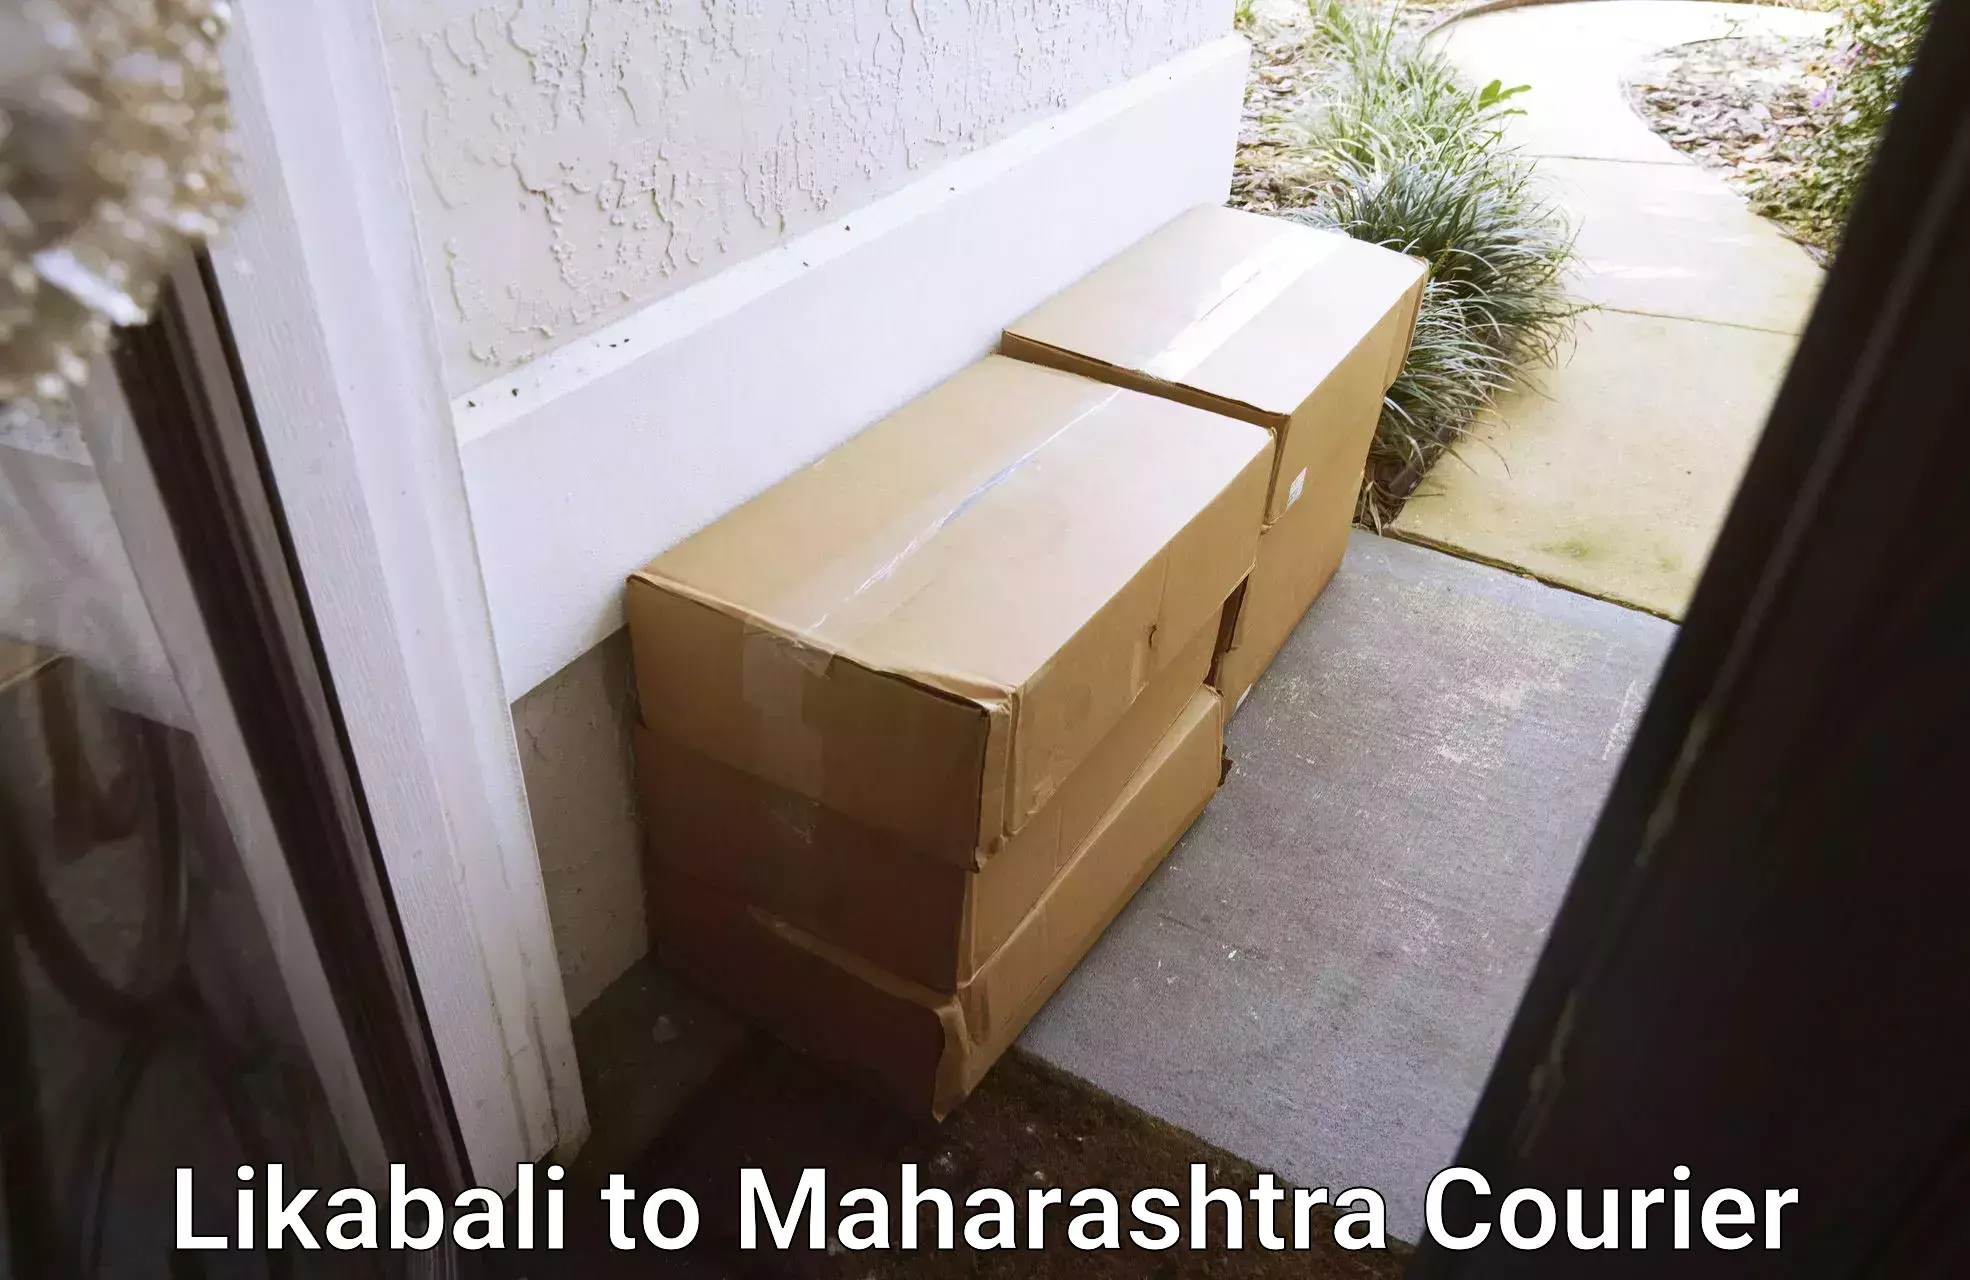 Easy access courier services in Likabali to Ramtek